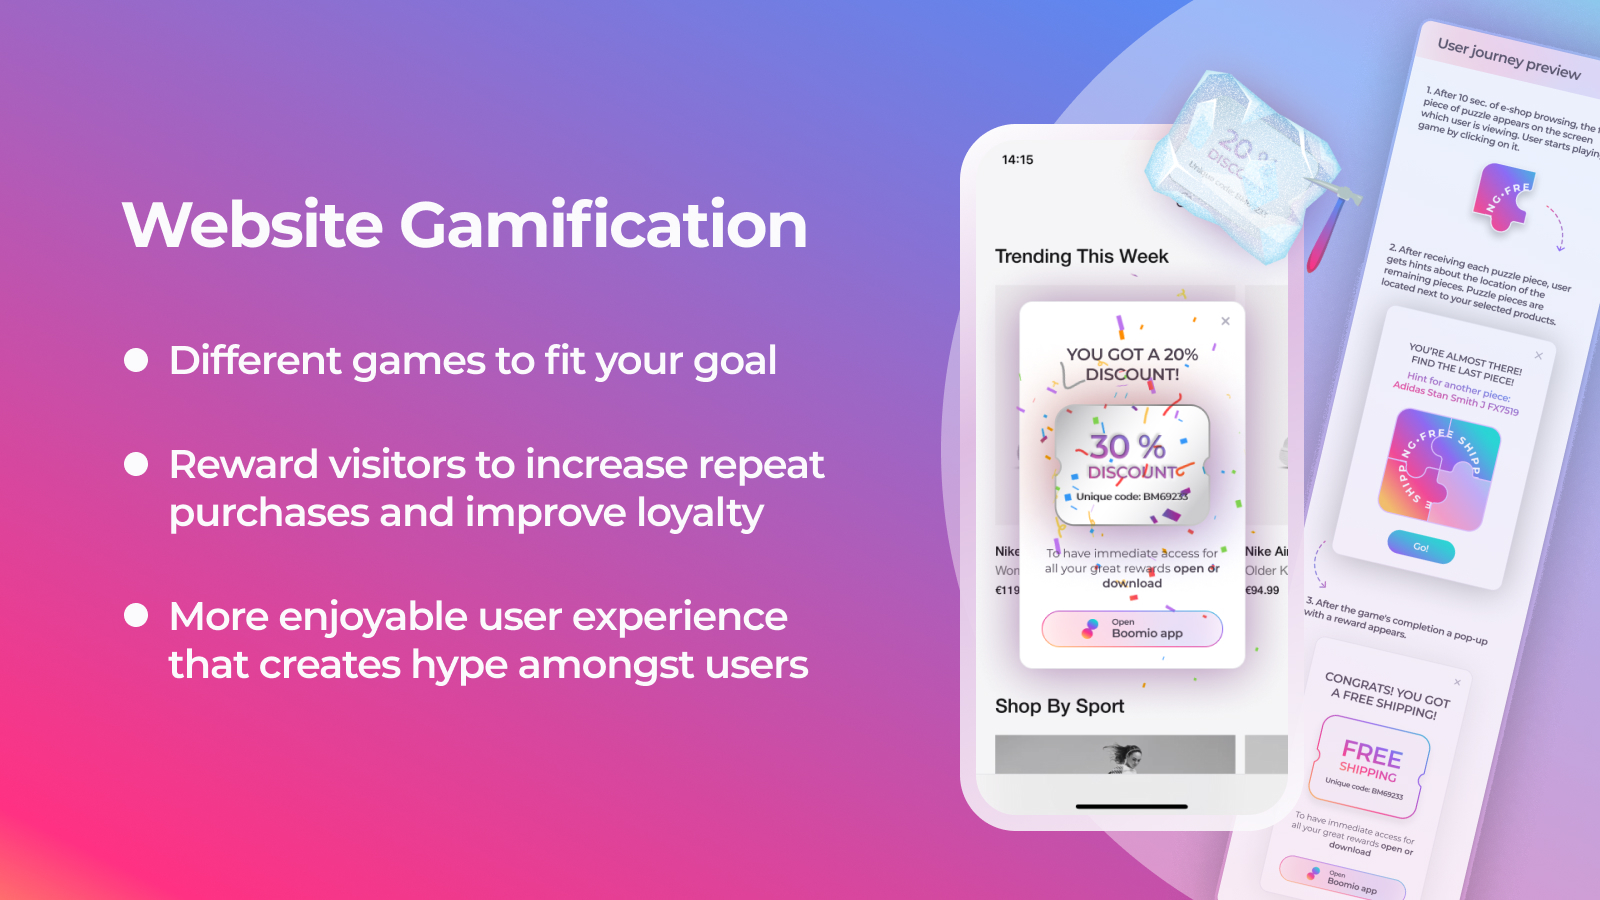 Gamify Your Website, Captivate Your Audience - Transform your digital space with Boomio's Website Gamification, creating an engaging and delightful user experience.